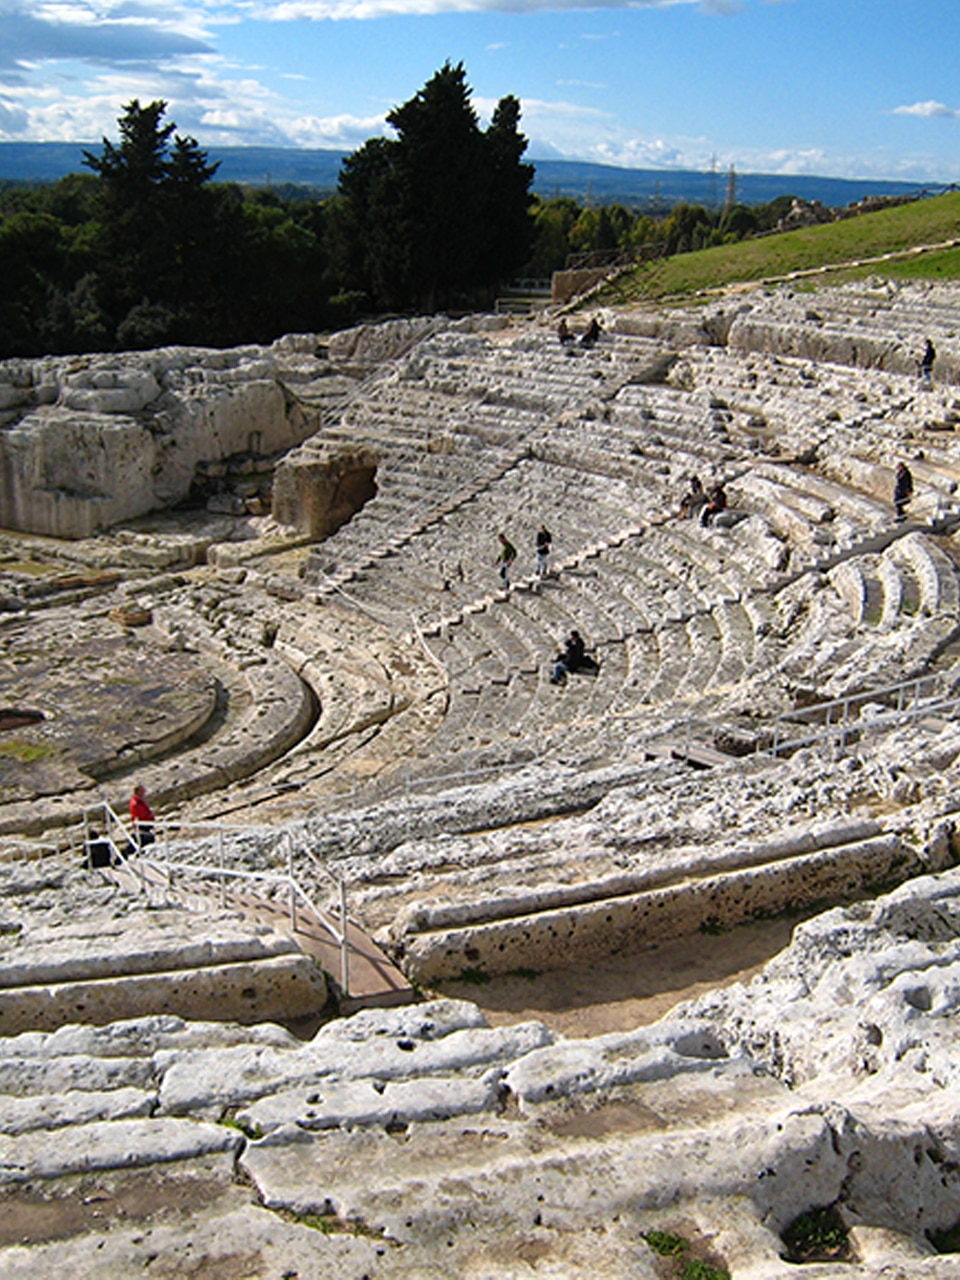 A portion of the Roman amphitheater of Syracuse